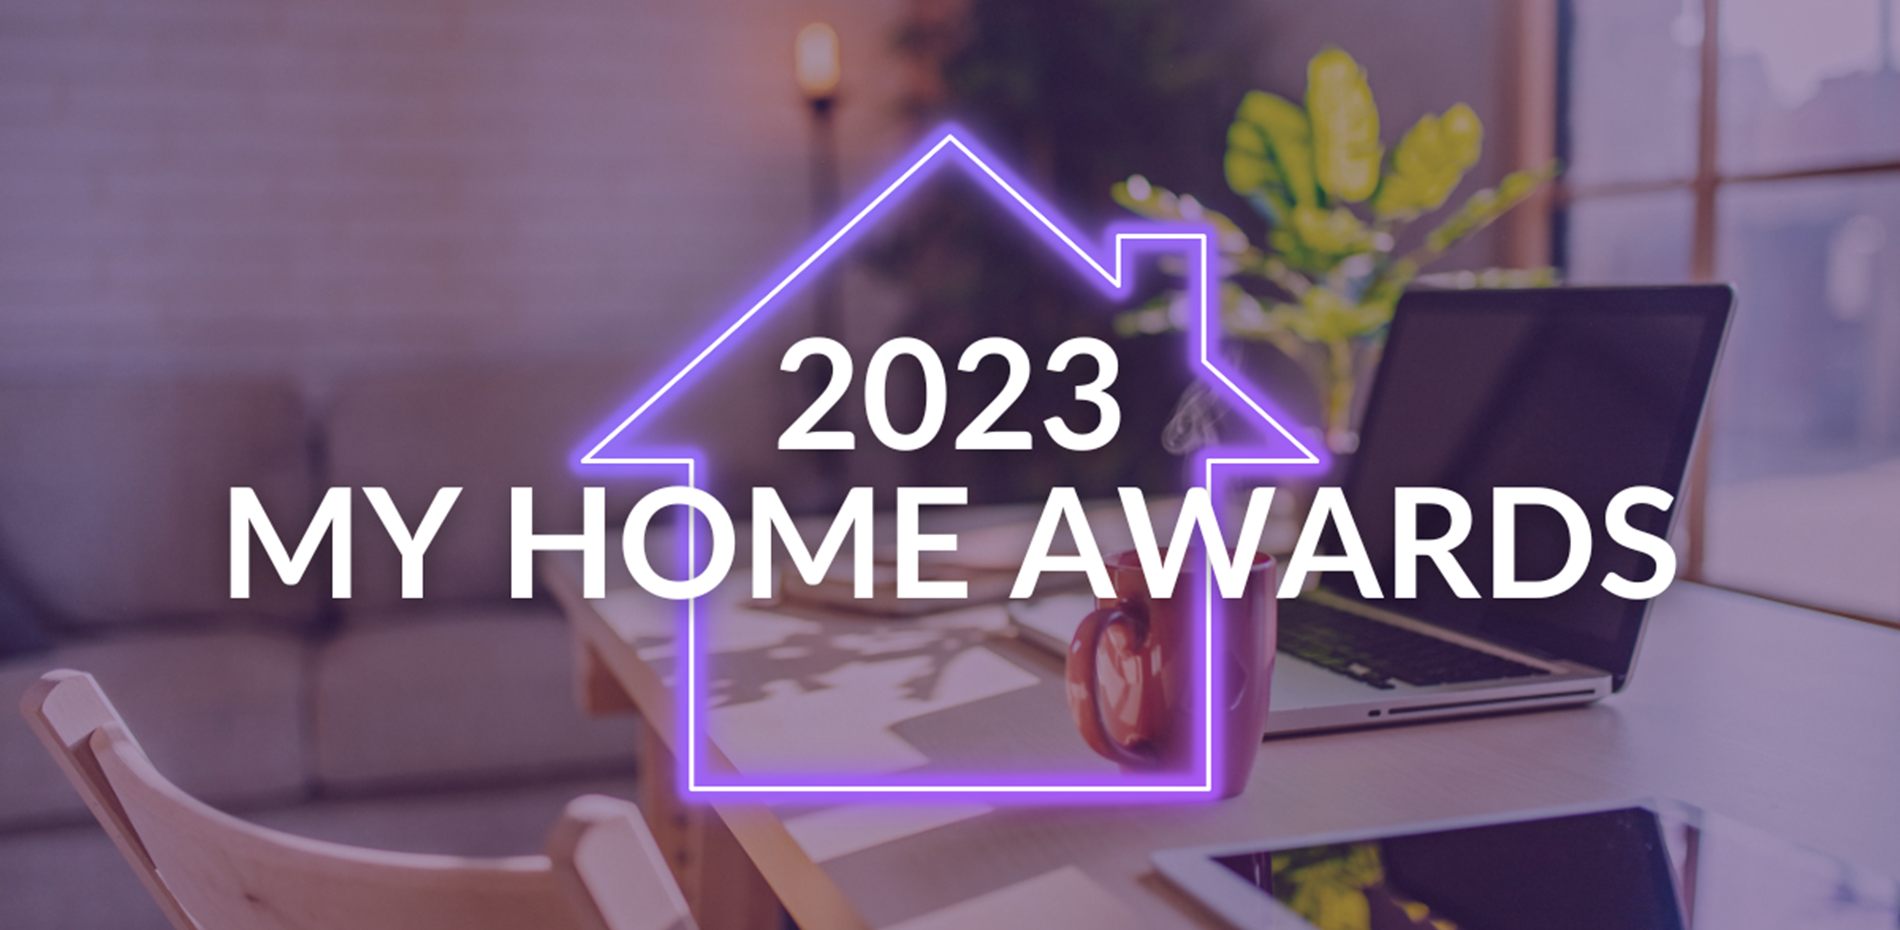 My Home Awards are back for 2023 Main Image